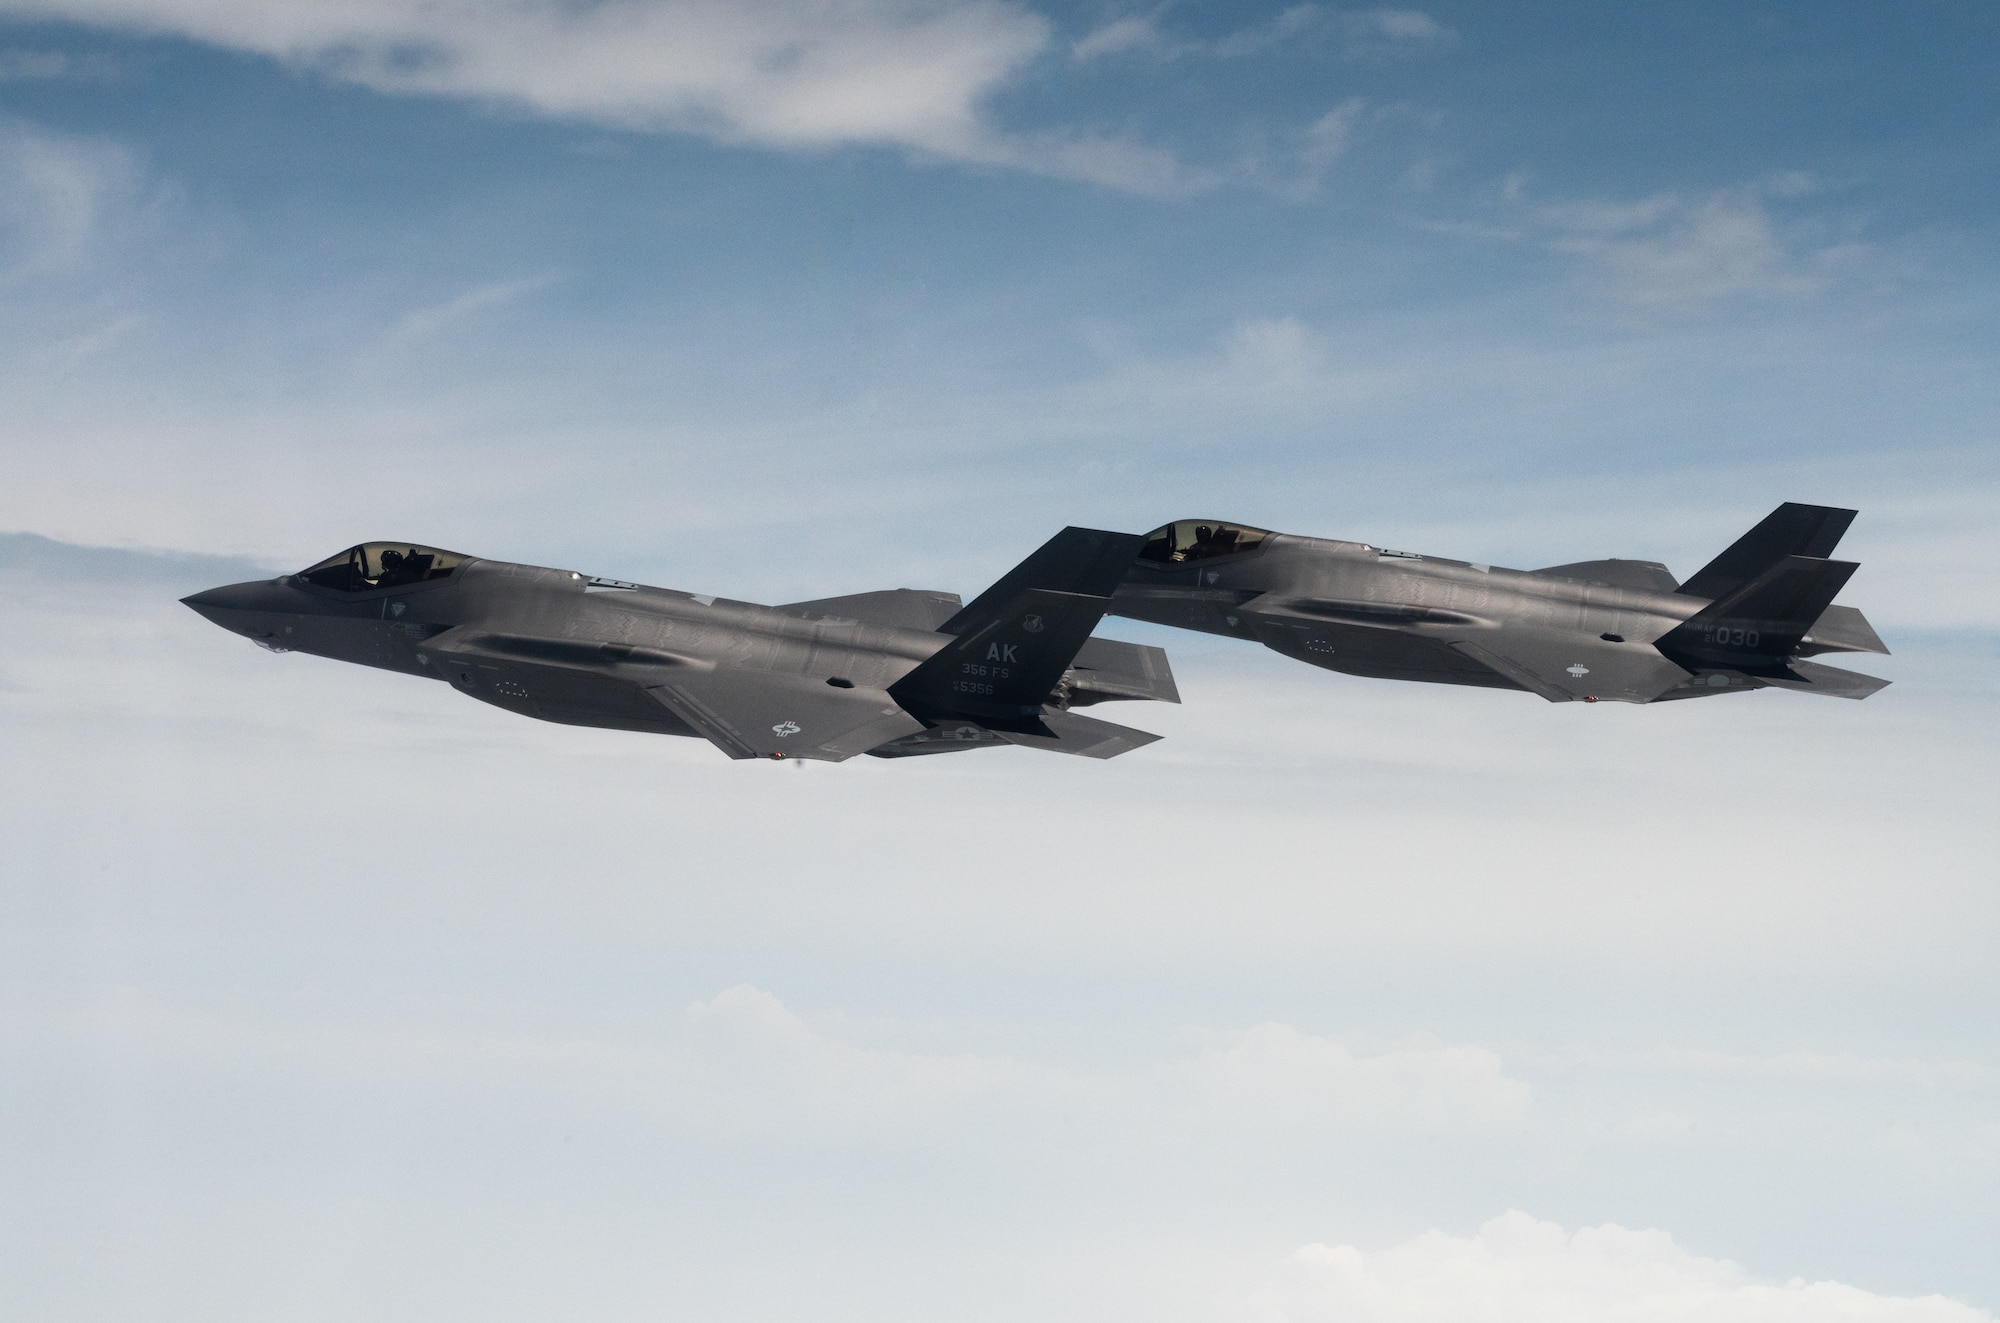 U.S. Air Force F-35 Lightning IIs from the 365th Fighter Squadron at Eielson Air Force Base fly side by side with Republic of Korea Air Force F-35s from the 151st and 152nd Combat Flight Squadrons as part of a bilateral exercise over the Yellow Sea